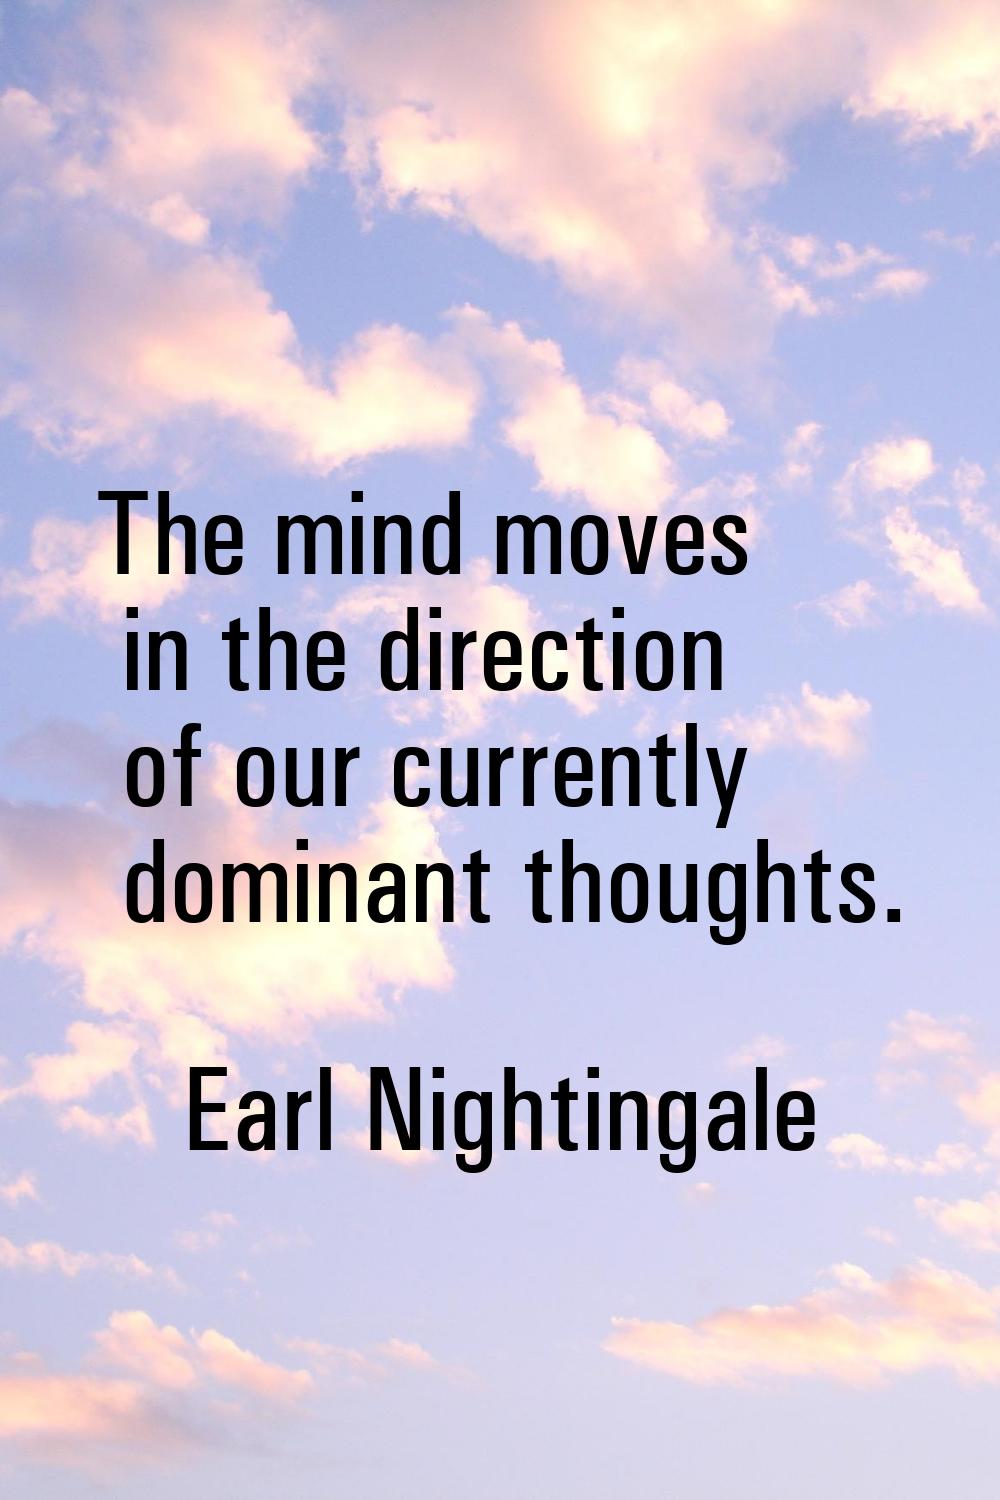 The mind moves in the direction of our currently dominant thoughts.